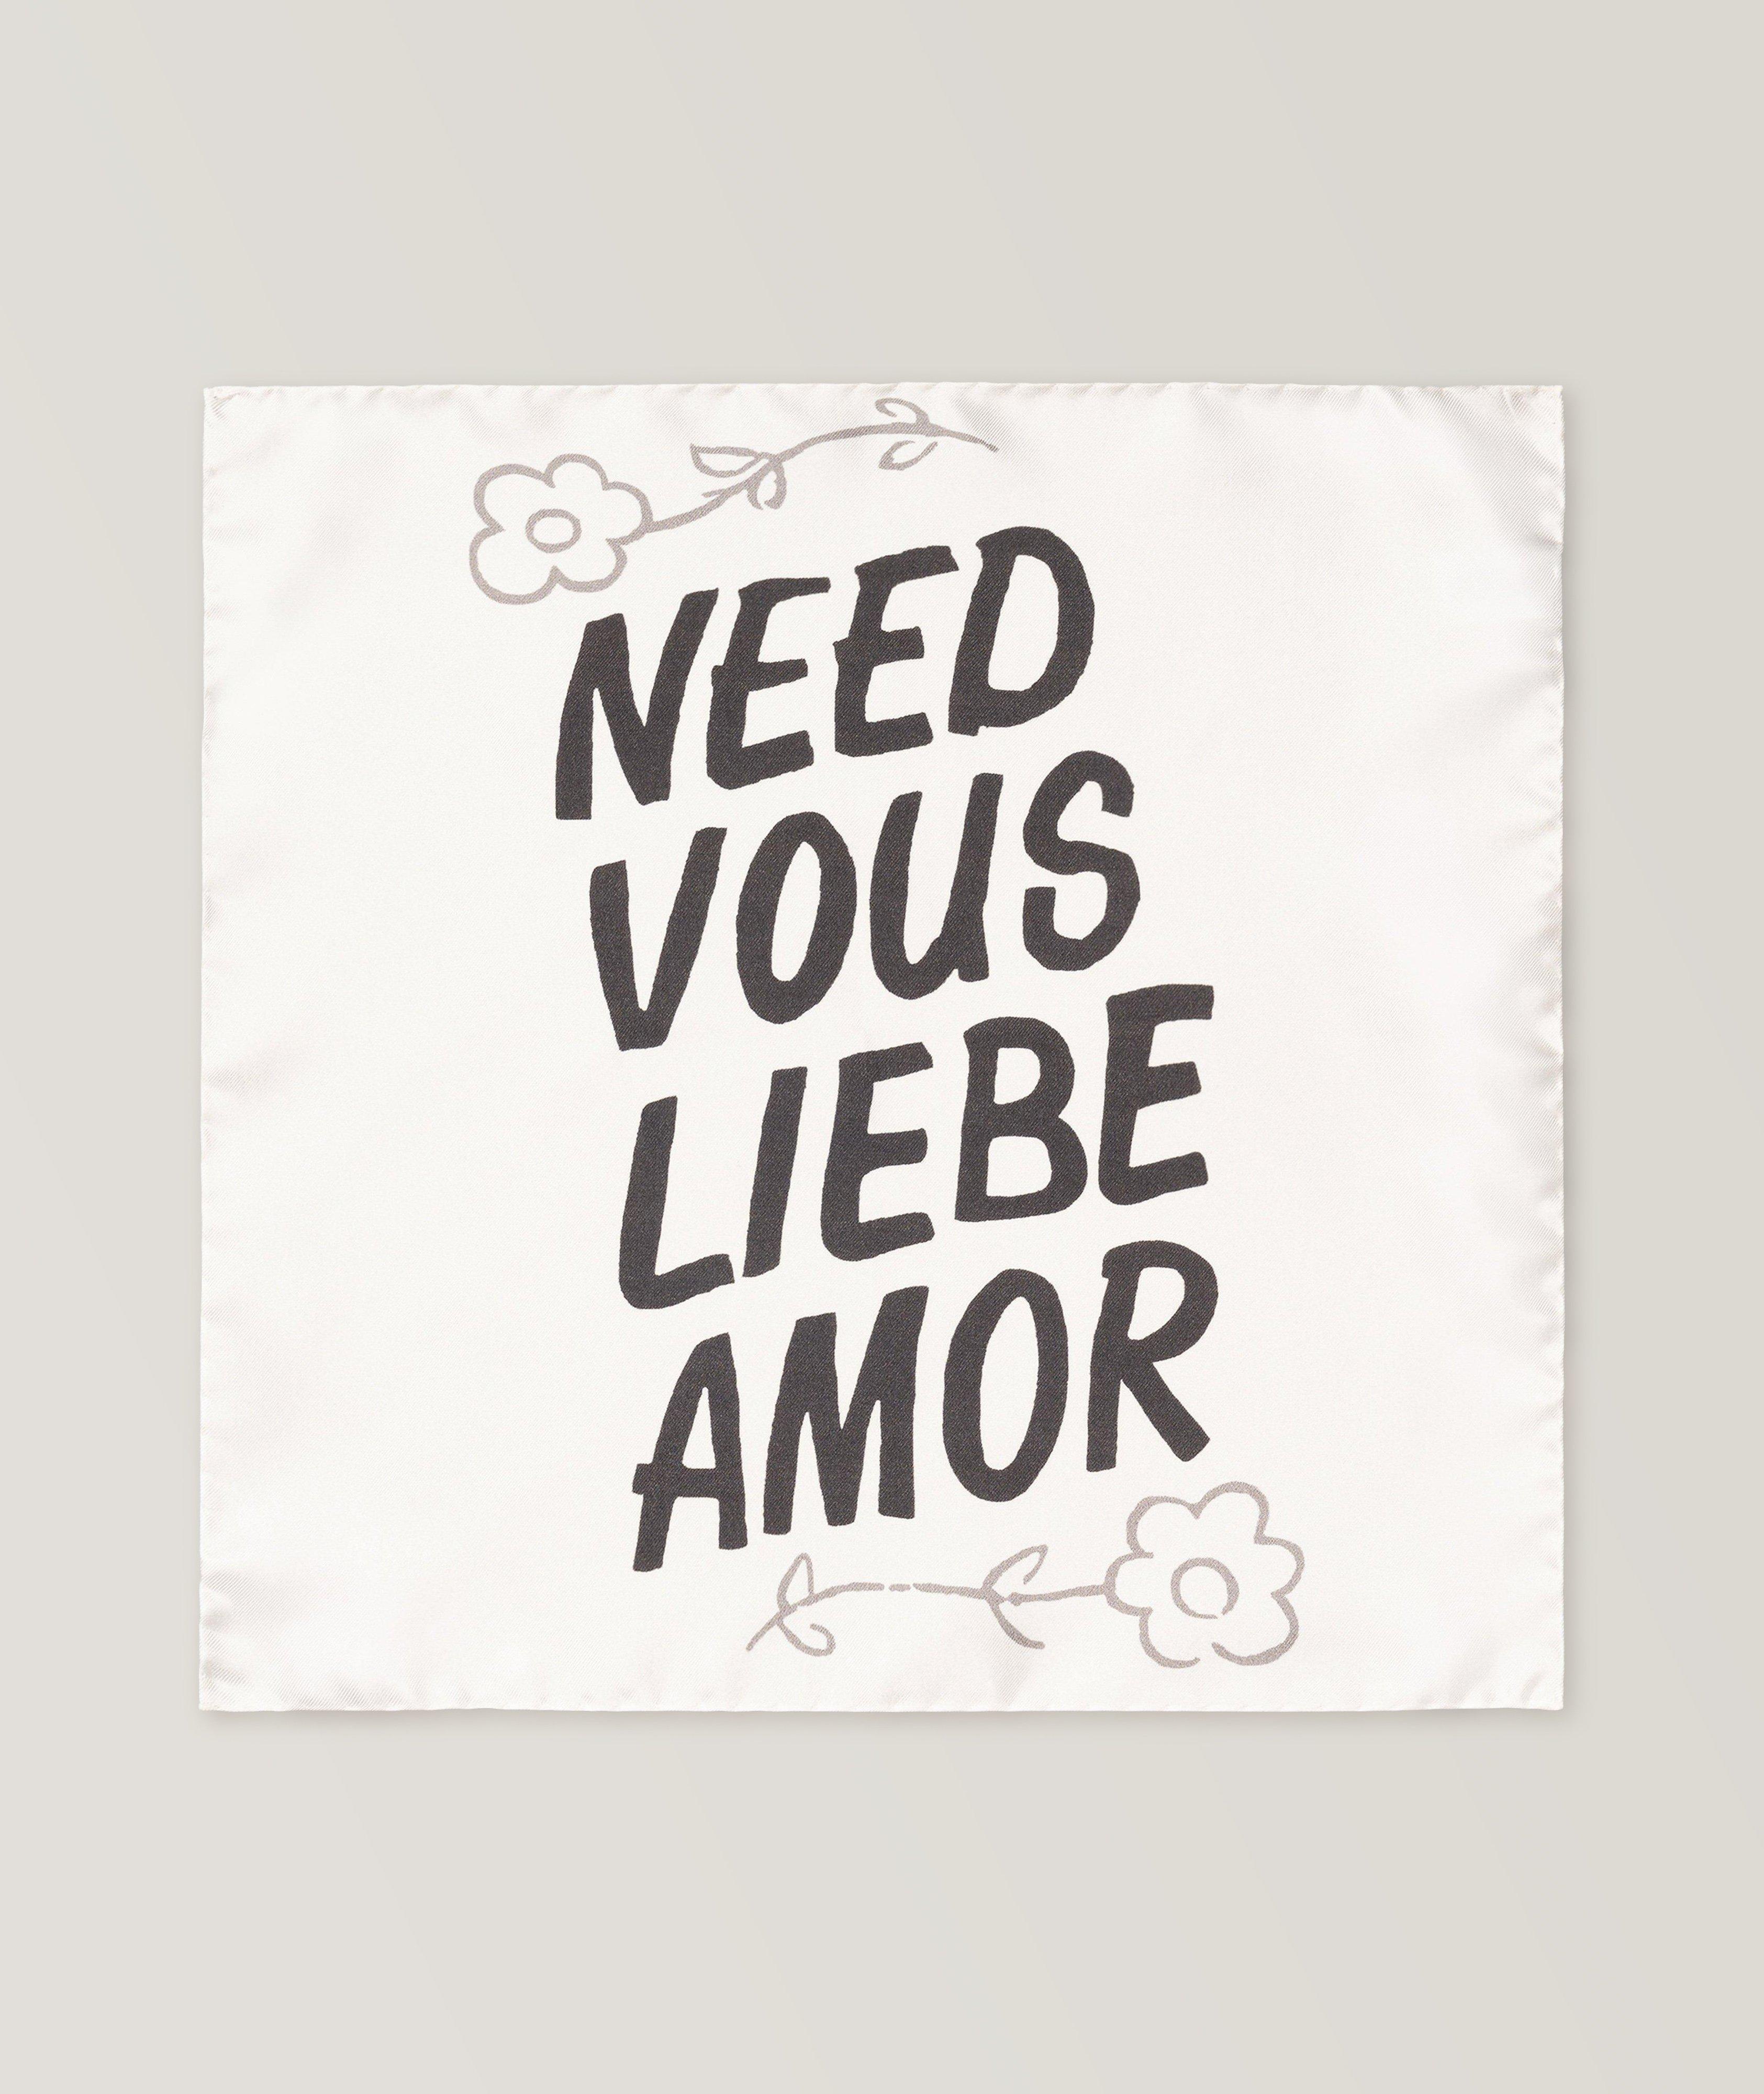 The Beatles Collection "Need Vous Liebe Amor" Silk Pocket Square image 0